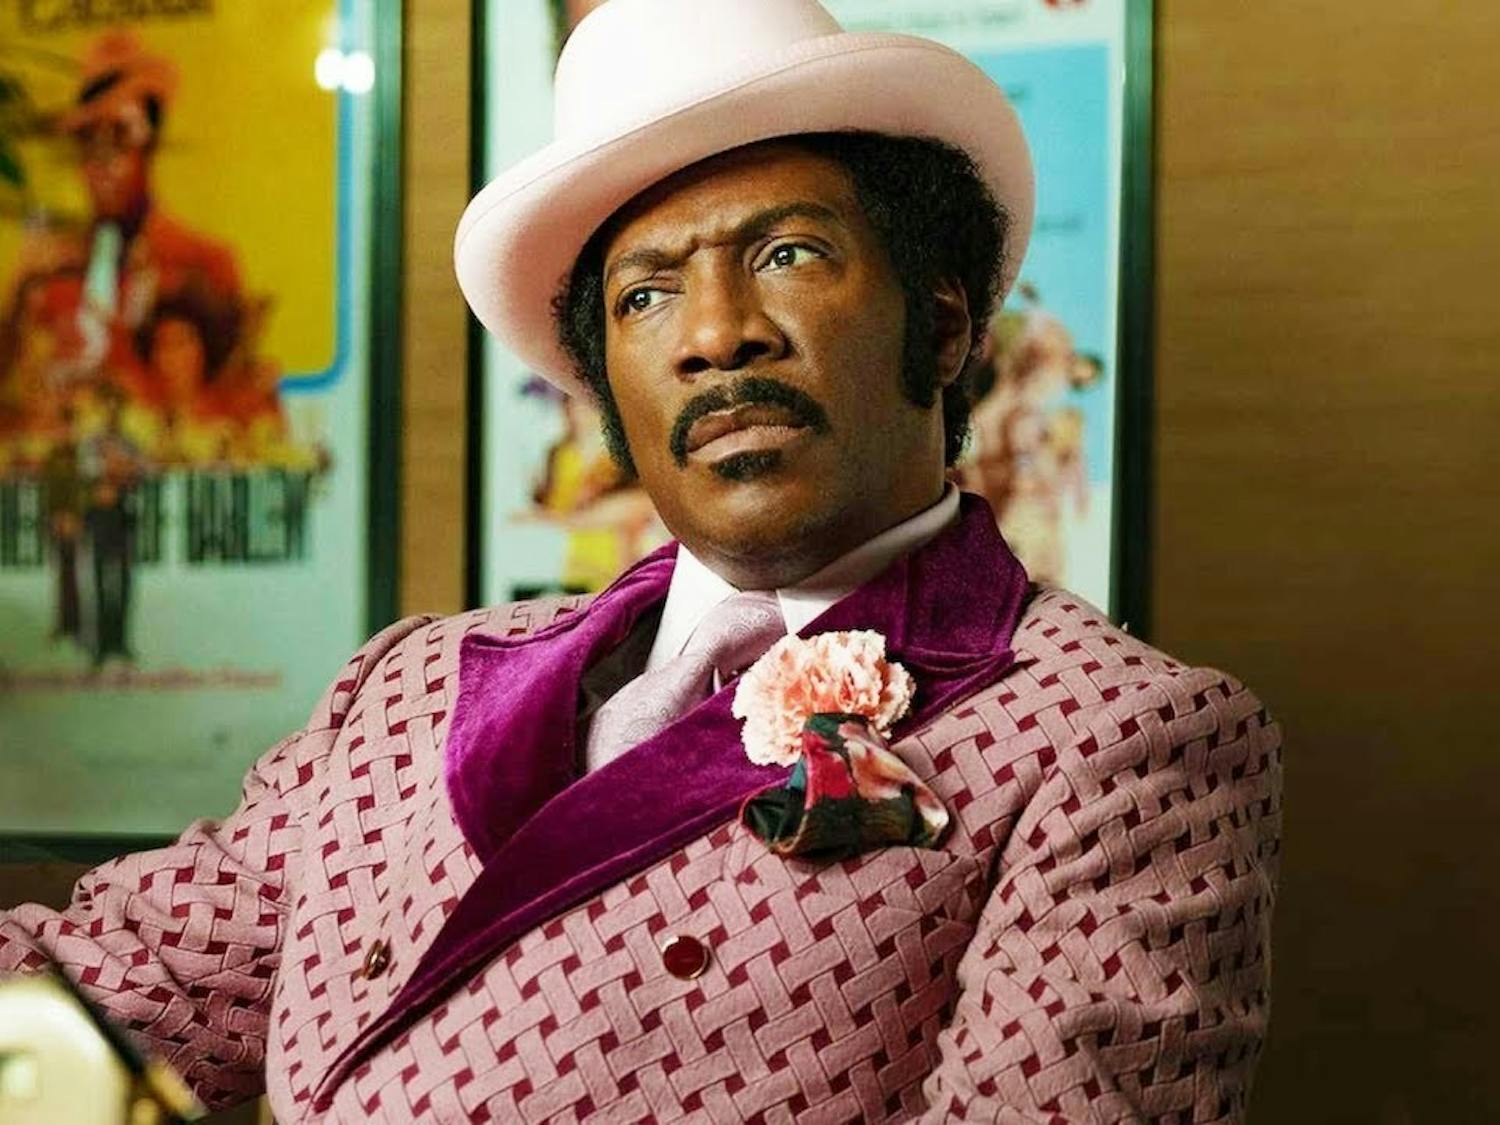 Rudy Ray Moore (Eddie Murphy) struggles to find his place in the white-dominated movie industry in “Dolemite is My Name”